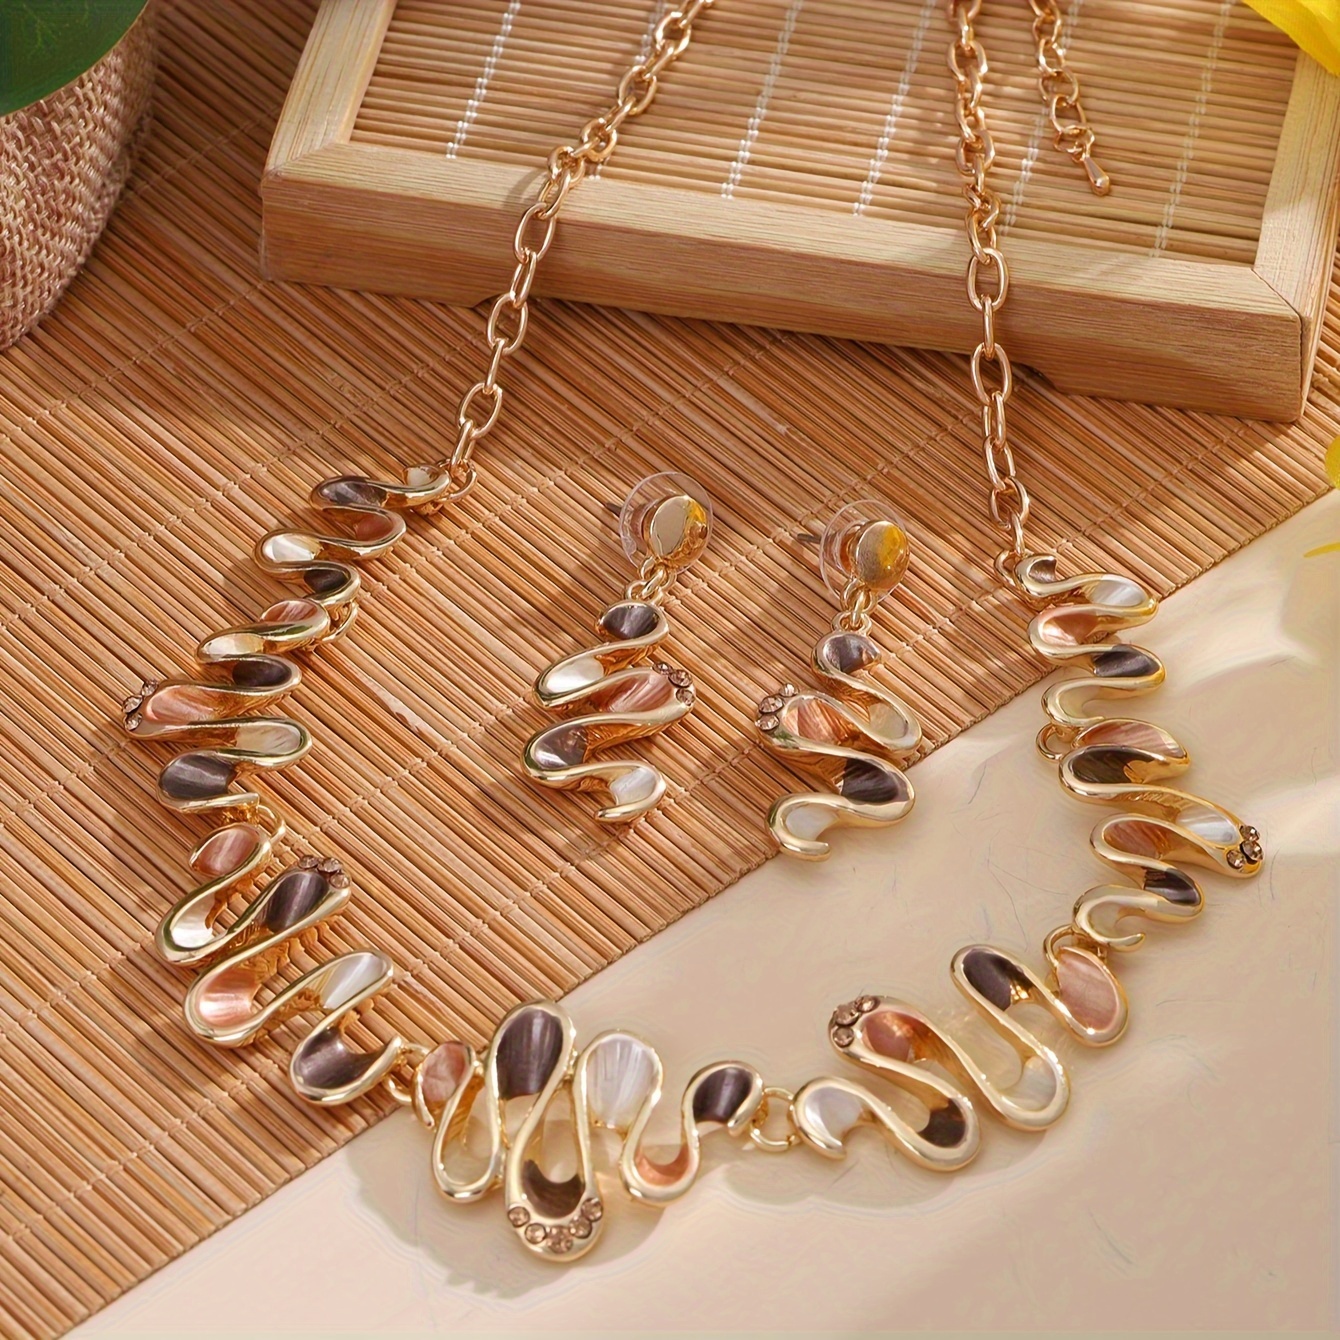 

1 Set, Stylish Fashion Jewelry, Irregular Wave Design, Women's Necklace And Earrings Set, Elegant Decor For Ladies Party And Date Accessory